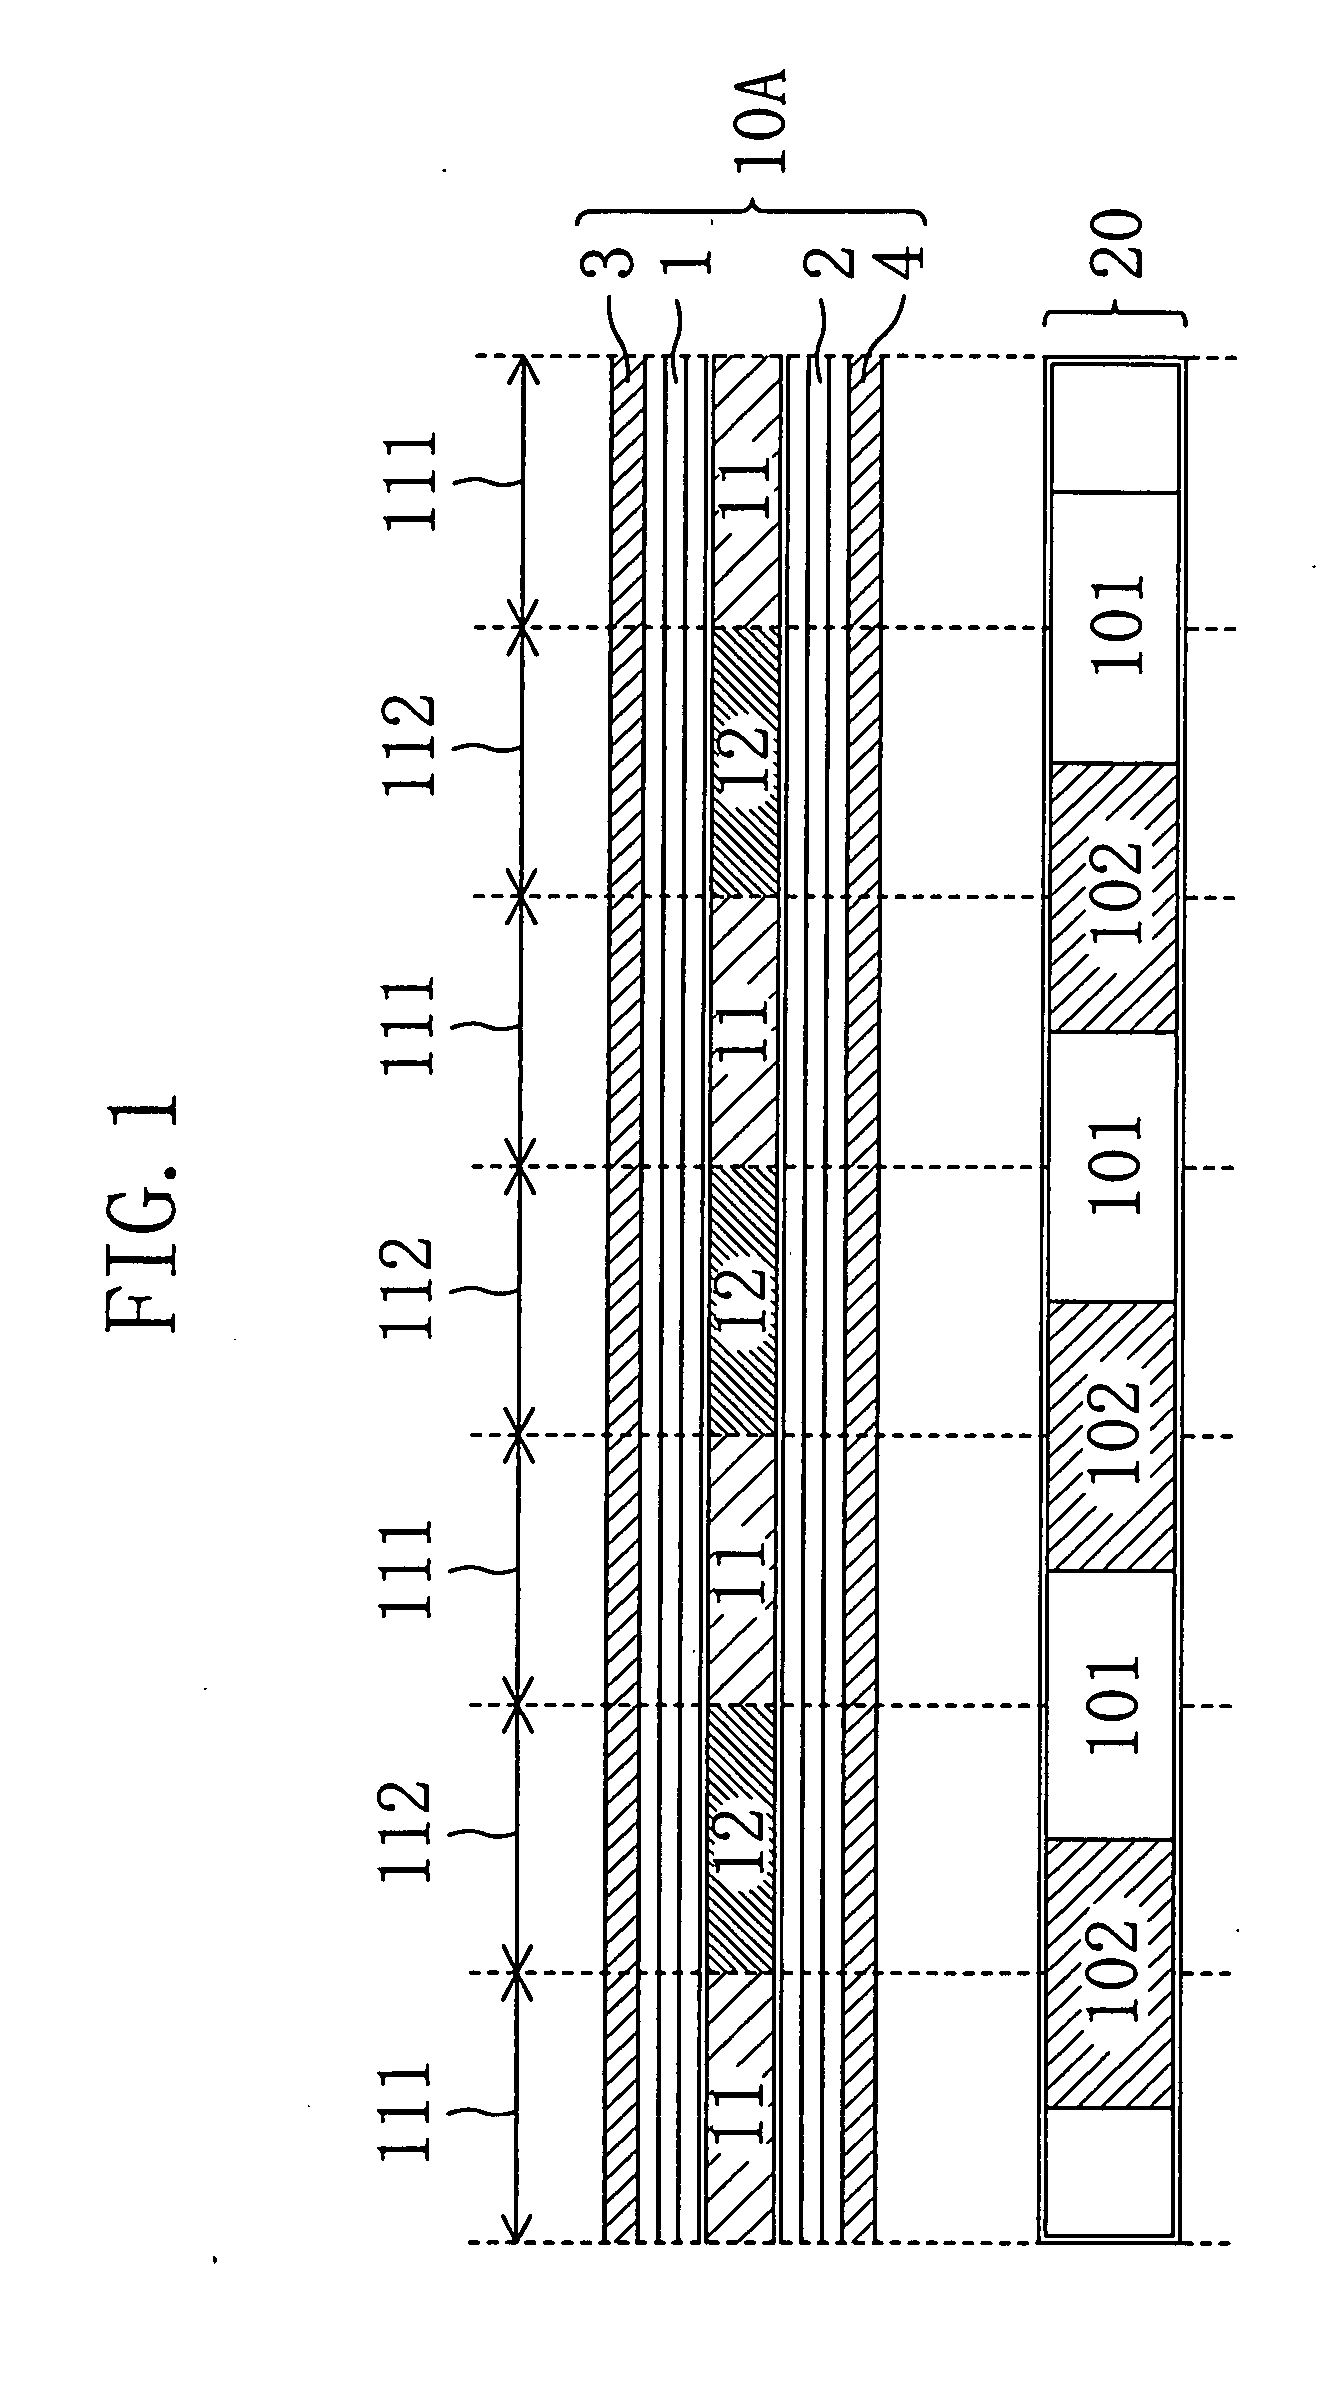 Parallax barrier element, method of producing the same, and display device